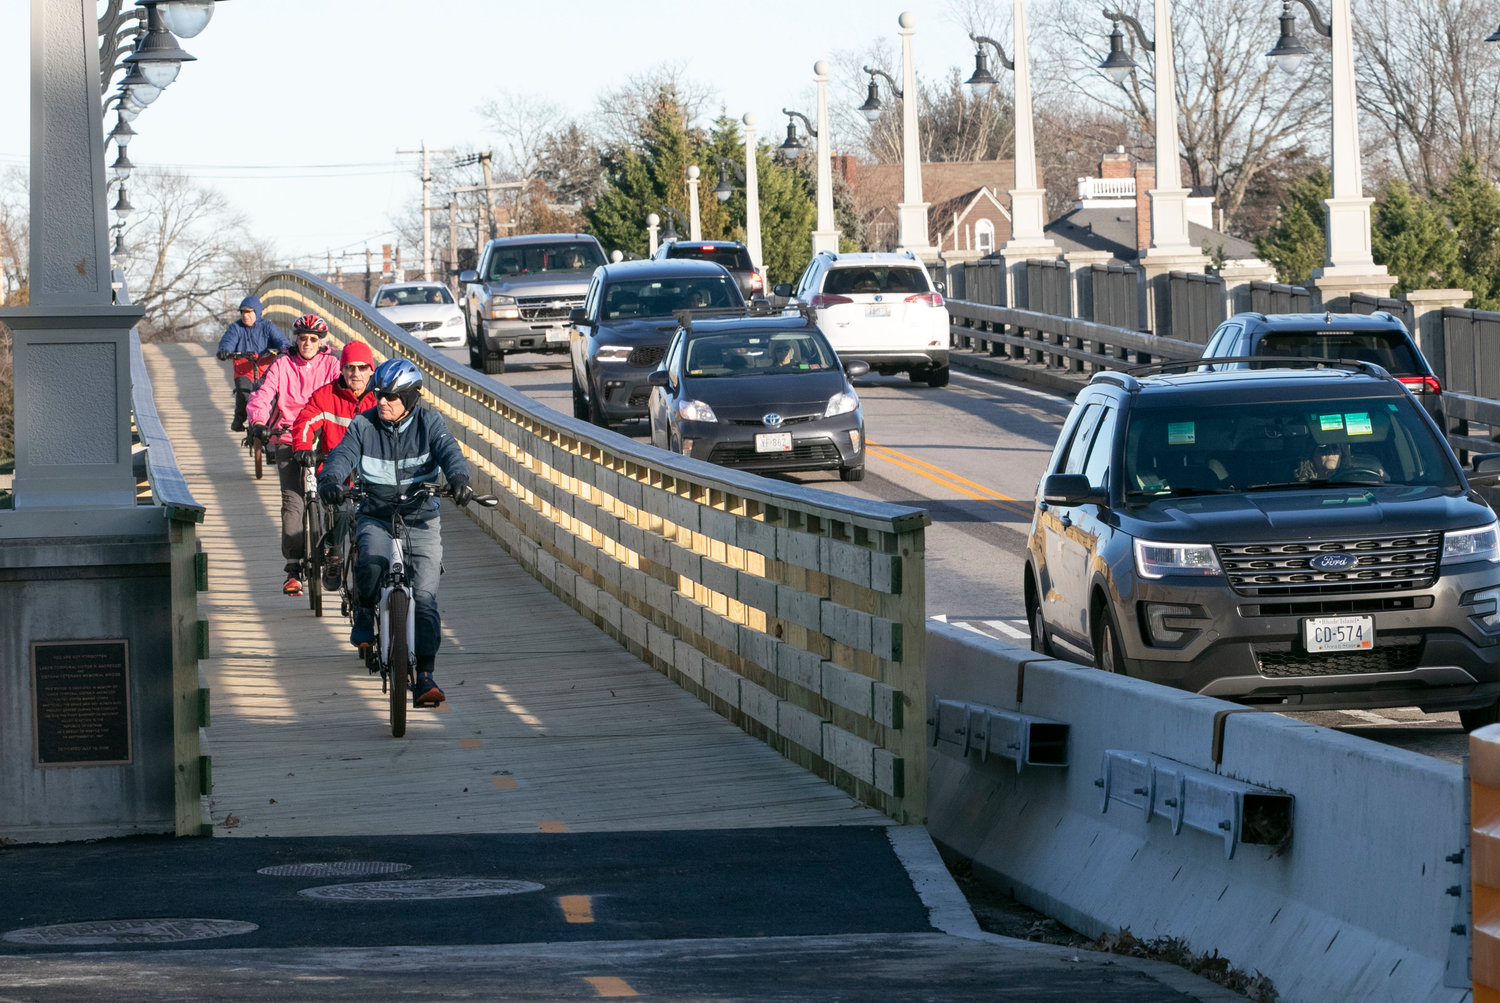 A group of riders out for a cruise on a recent Friday afternoon, coast down the newly built wooden boardwalks on the Barrington River Bridge. The riders yelled, "Well done," as they passed, to a worker and a Barrington policeman who were posted at the bottom of the bridge to look after the cross walk.